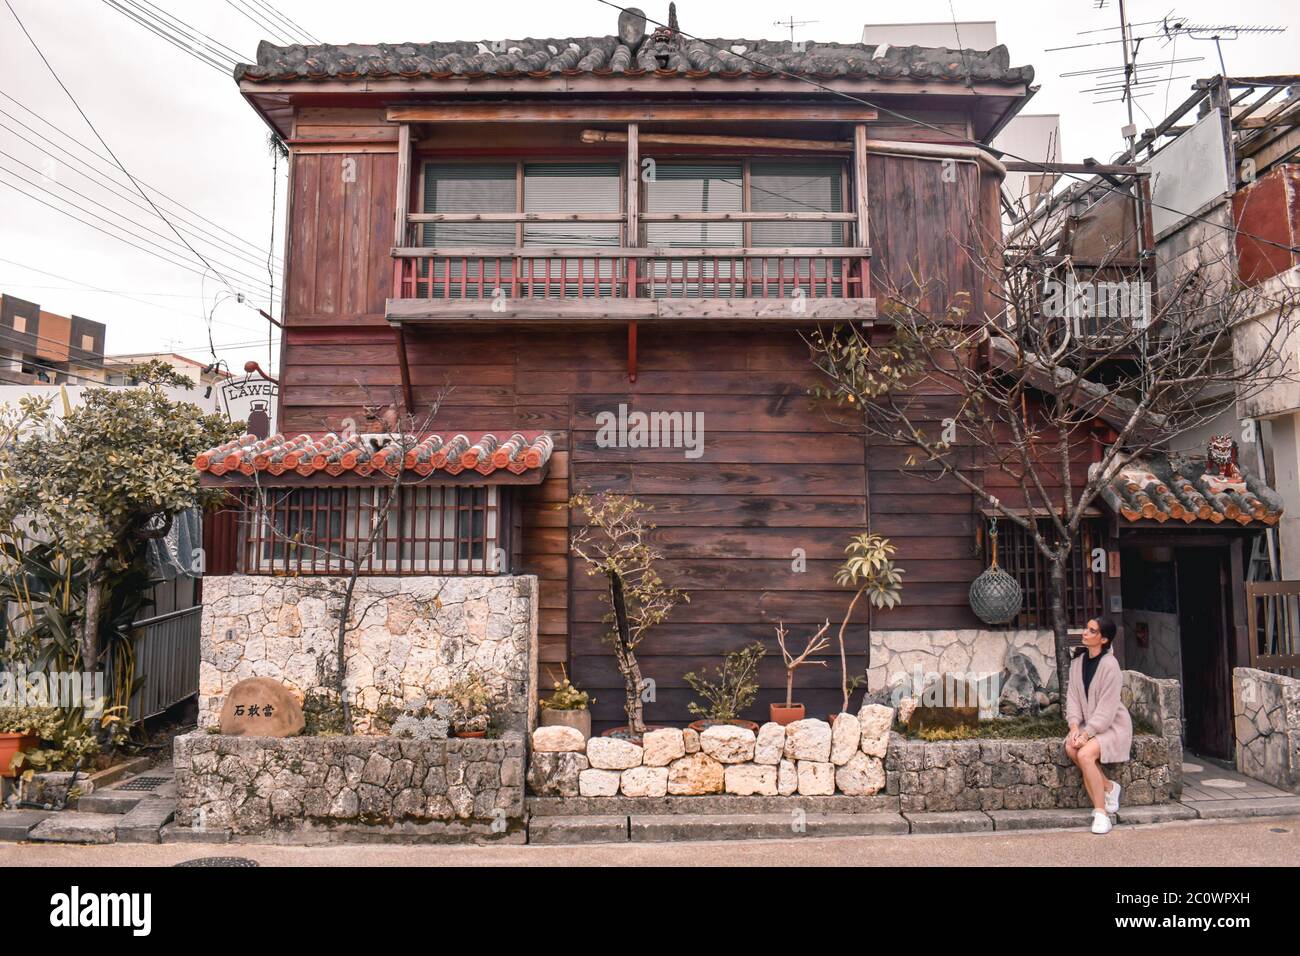 Girl sitting in front of a traditional Japanese wooden house in Naha Okinawa Japan Stock Photo